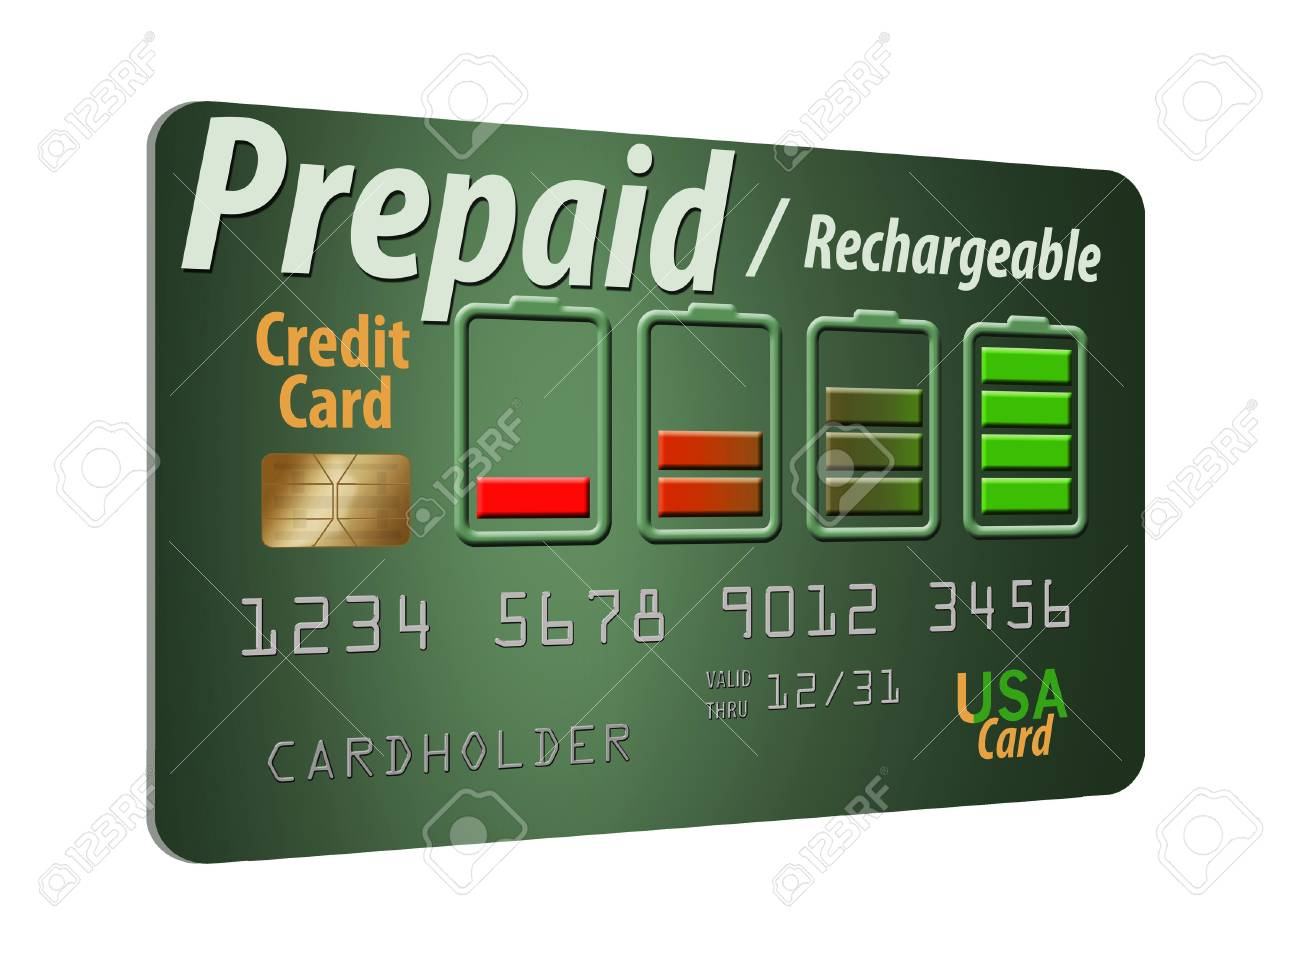 10 Fabulous Is A Secured Credit Card A Good Idea here is a rechargeable refillable prepaid credit card the recharge 2024